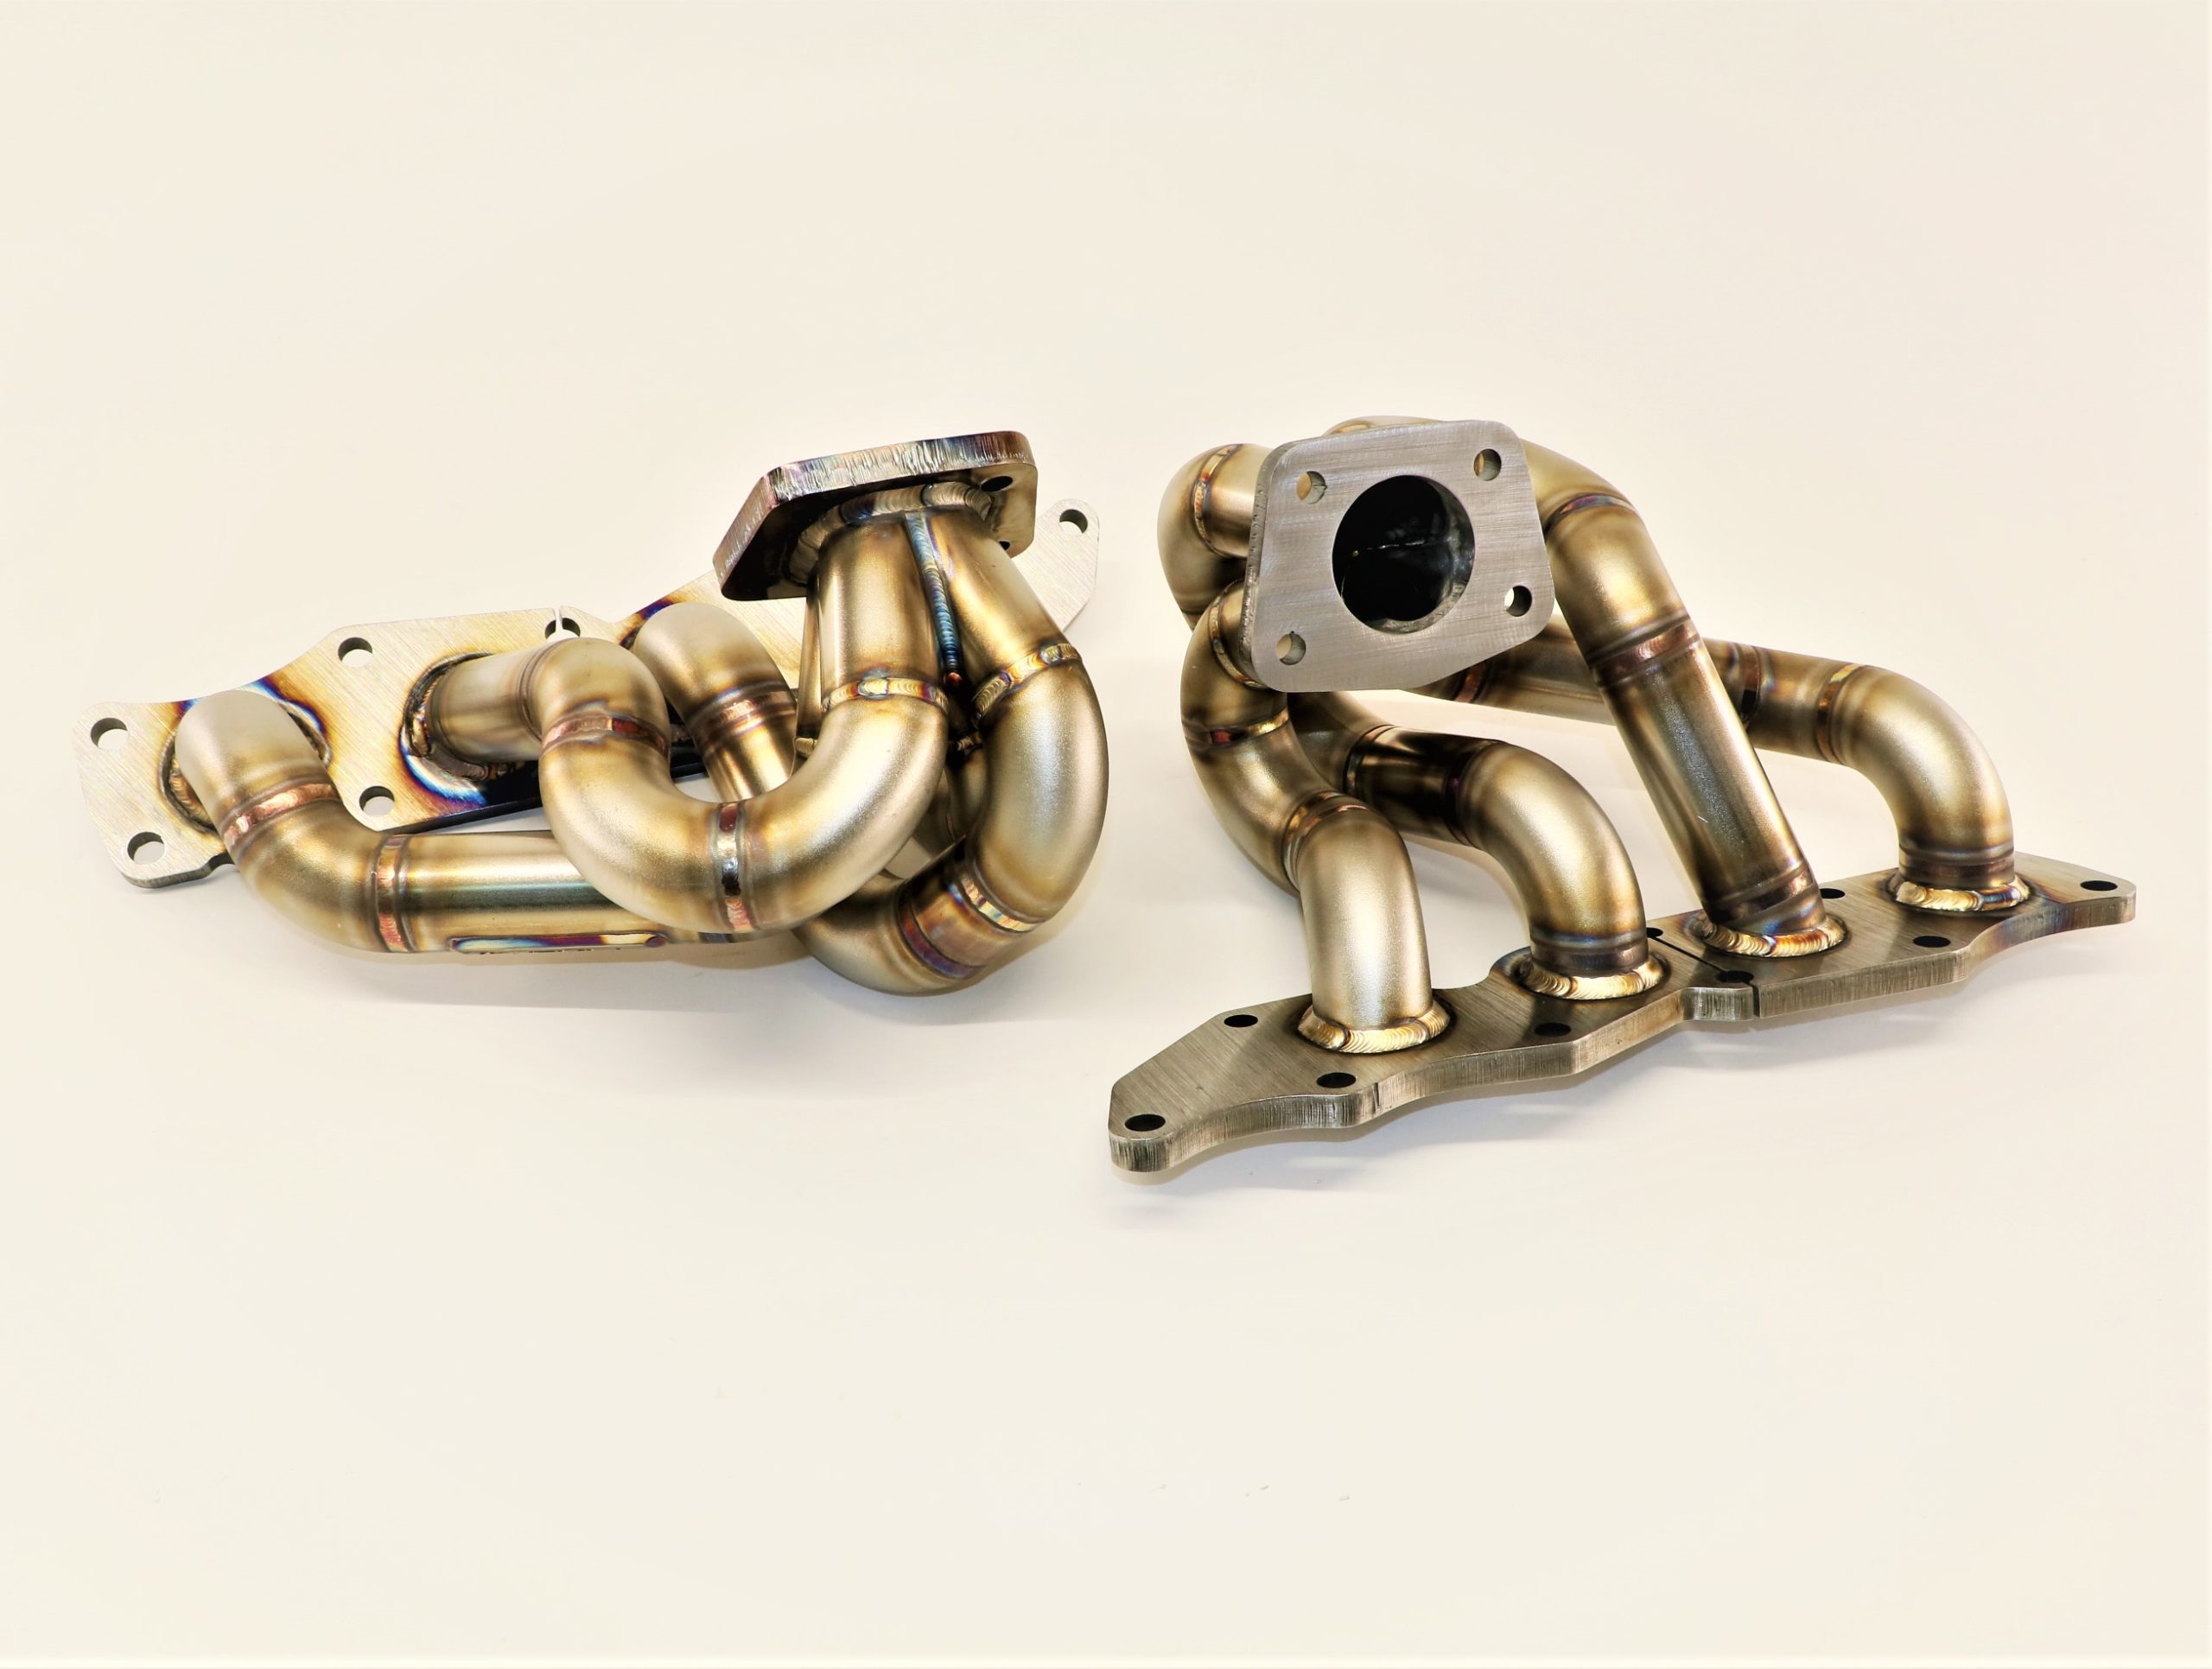 Stainless Steel Turbo Exhaust Manifold FOR MAZDA Mazdaspeed 3 and 6 2.3L